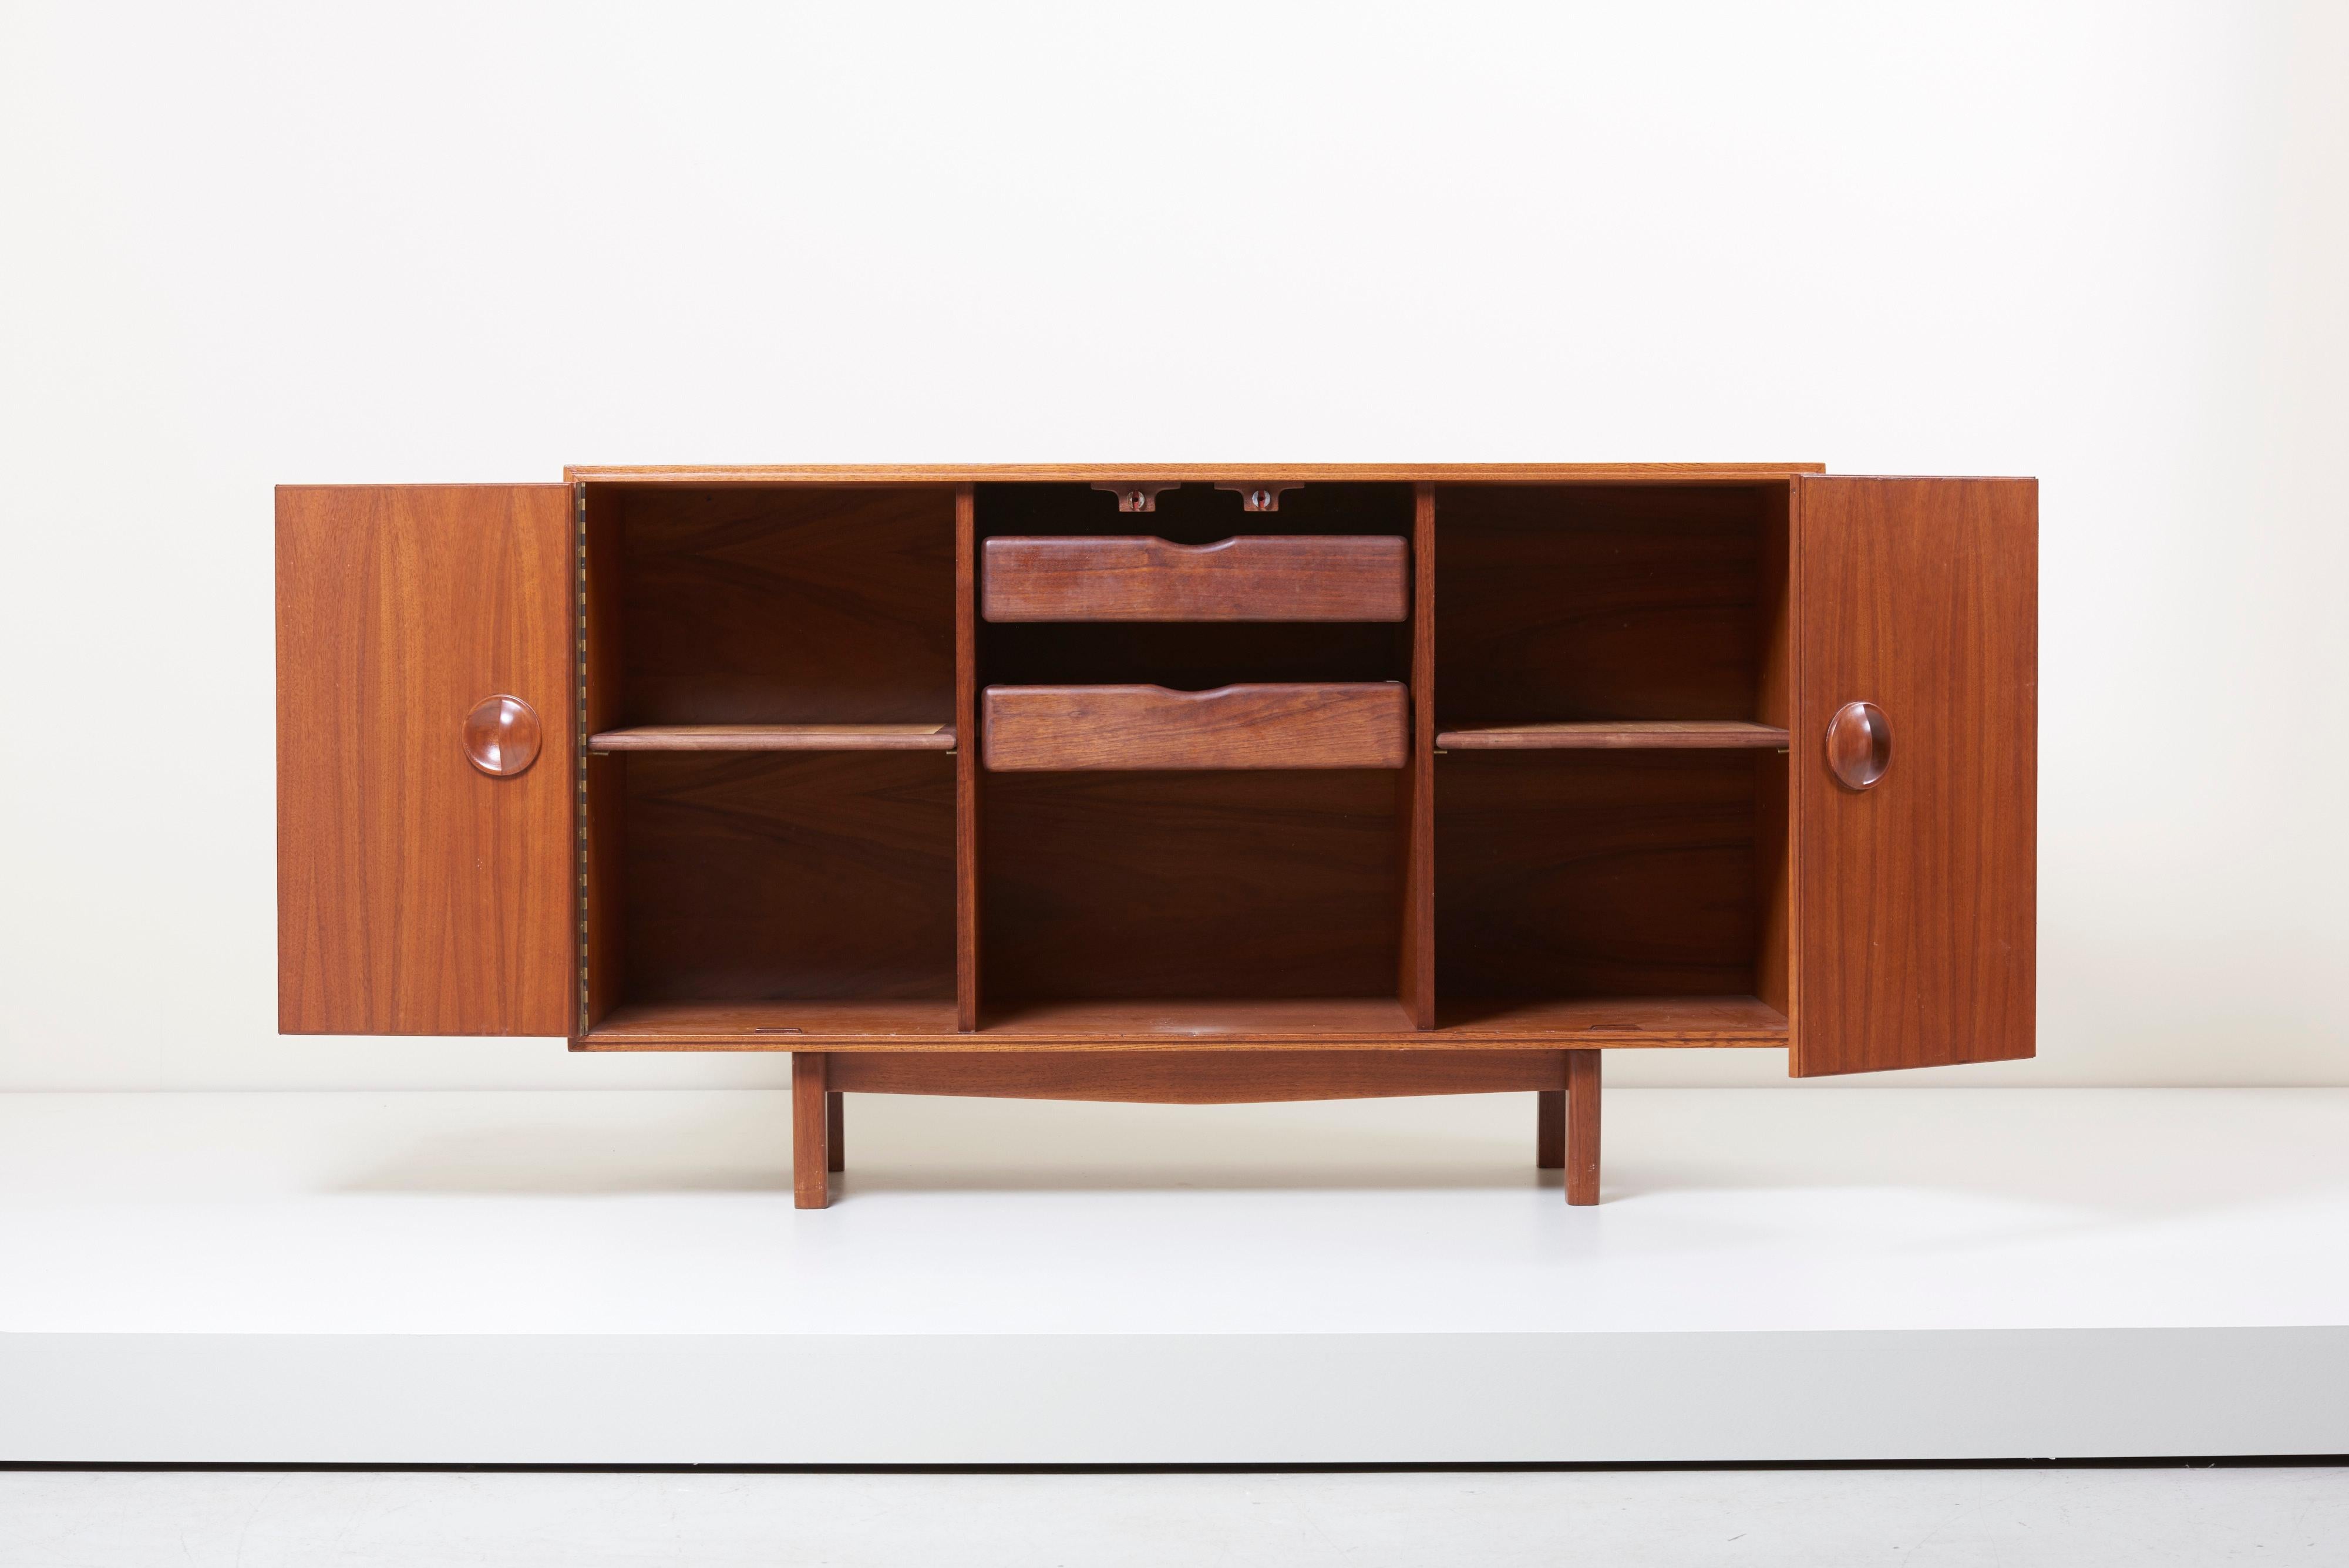 Woodwork One of a Kind Studio Sideboard or Cabinet by John Kapel Studio, US, 1960s For Sale